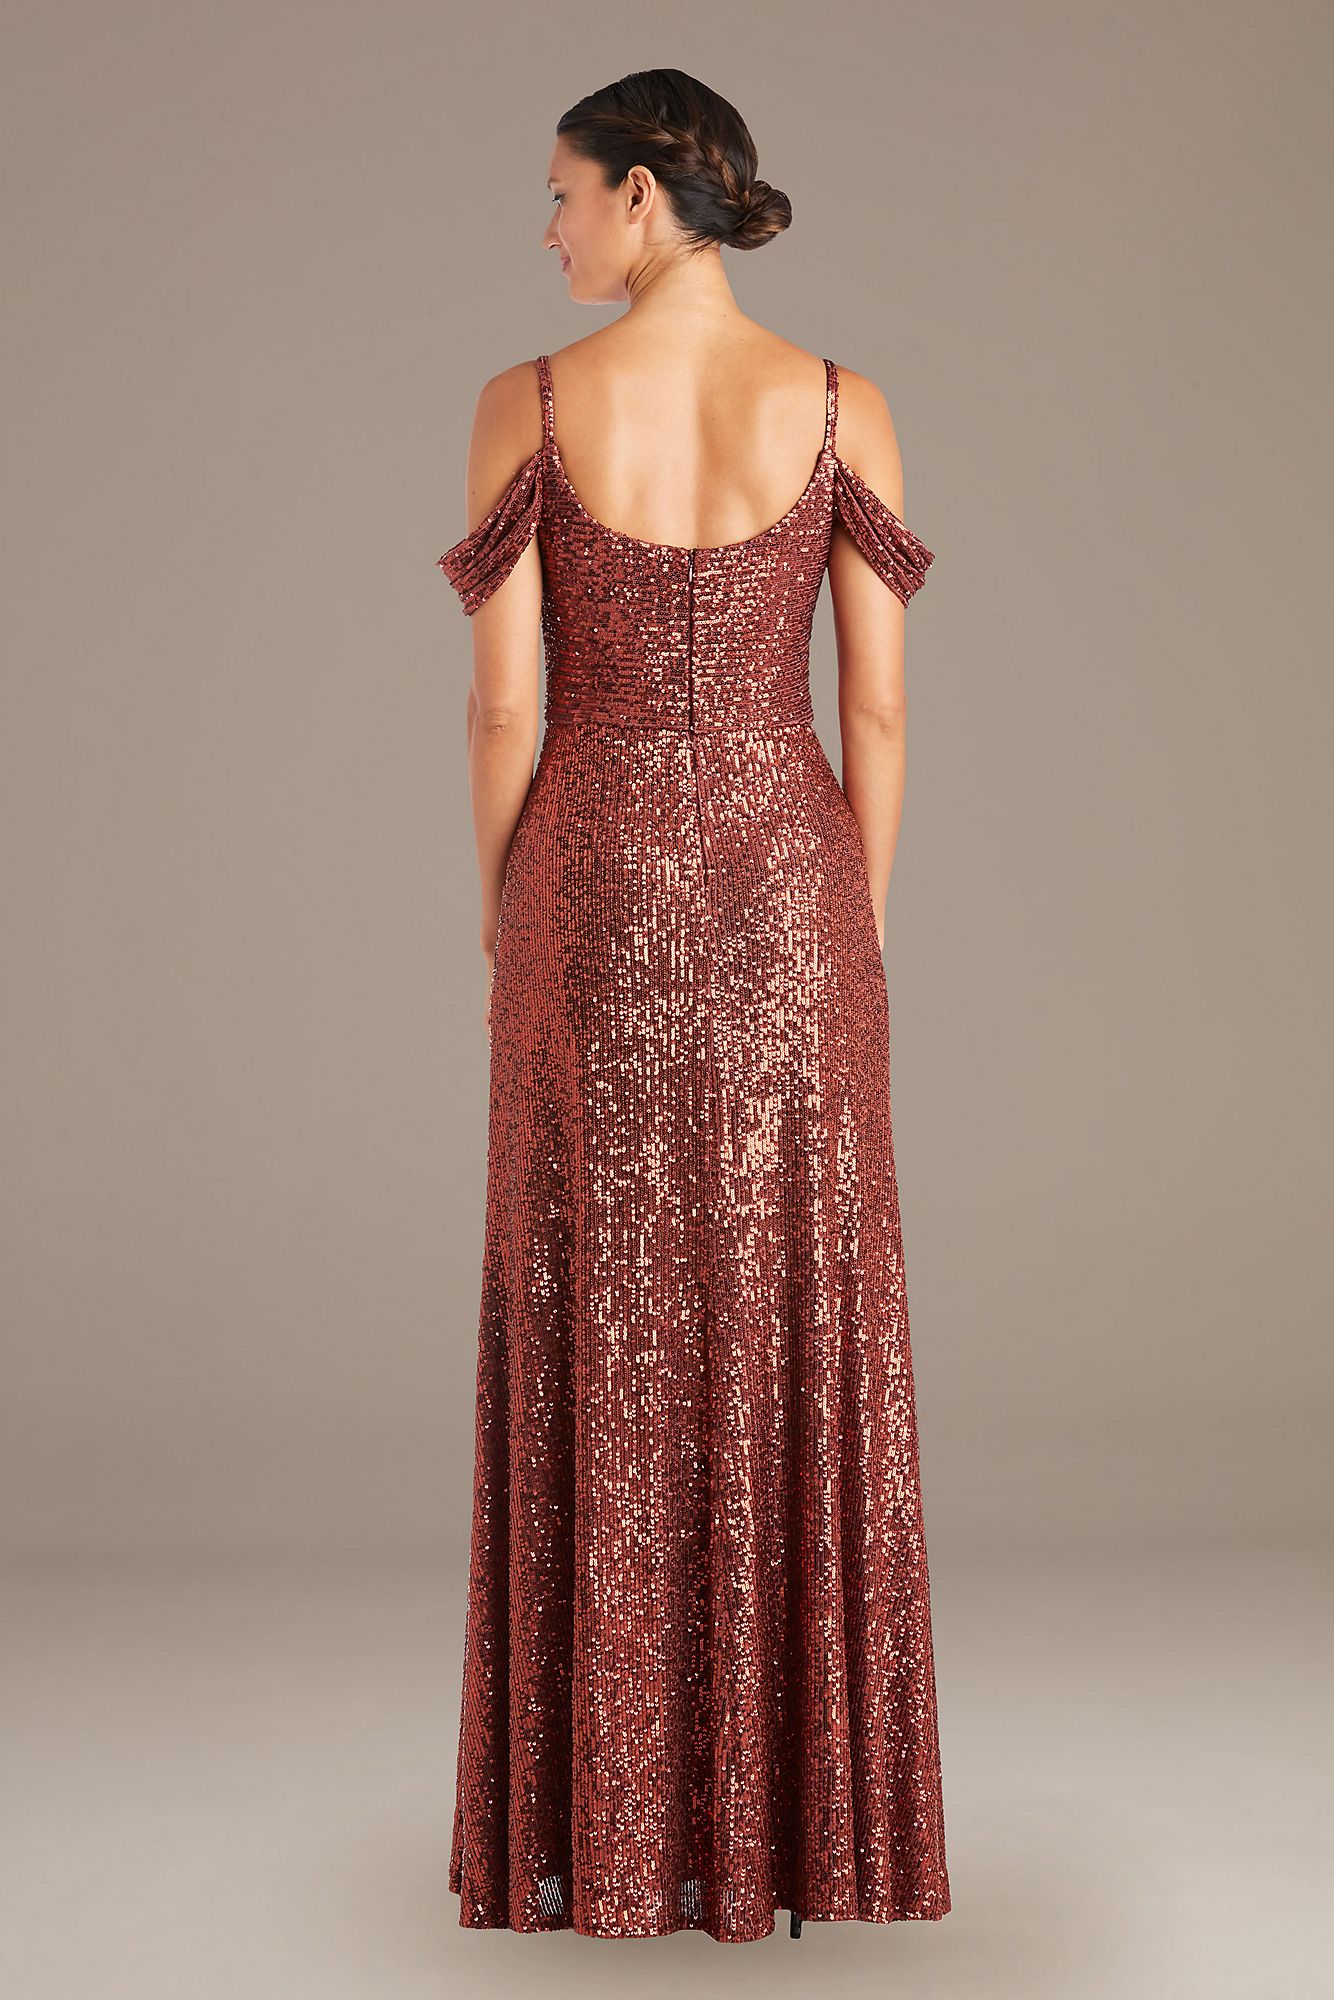 Swag Sleeve Allover Linear Sequin Gown RM Richards 21982